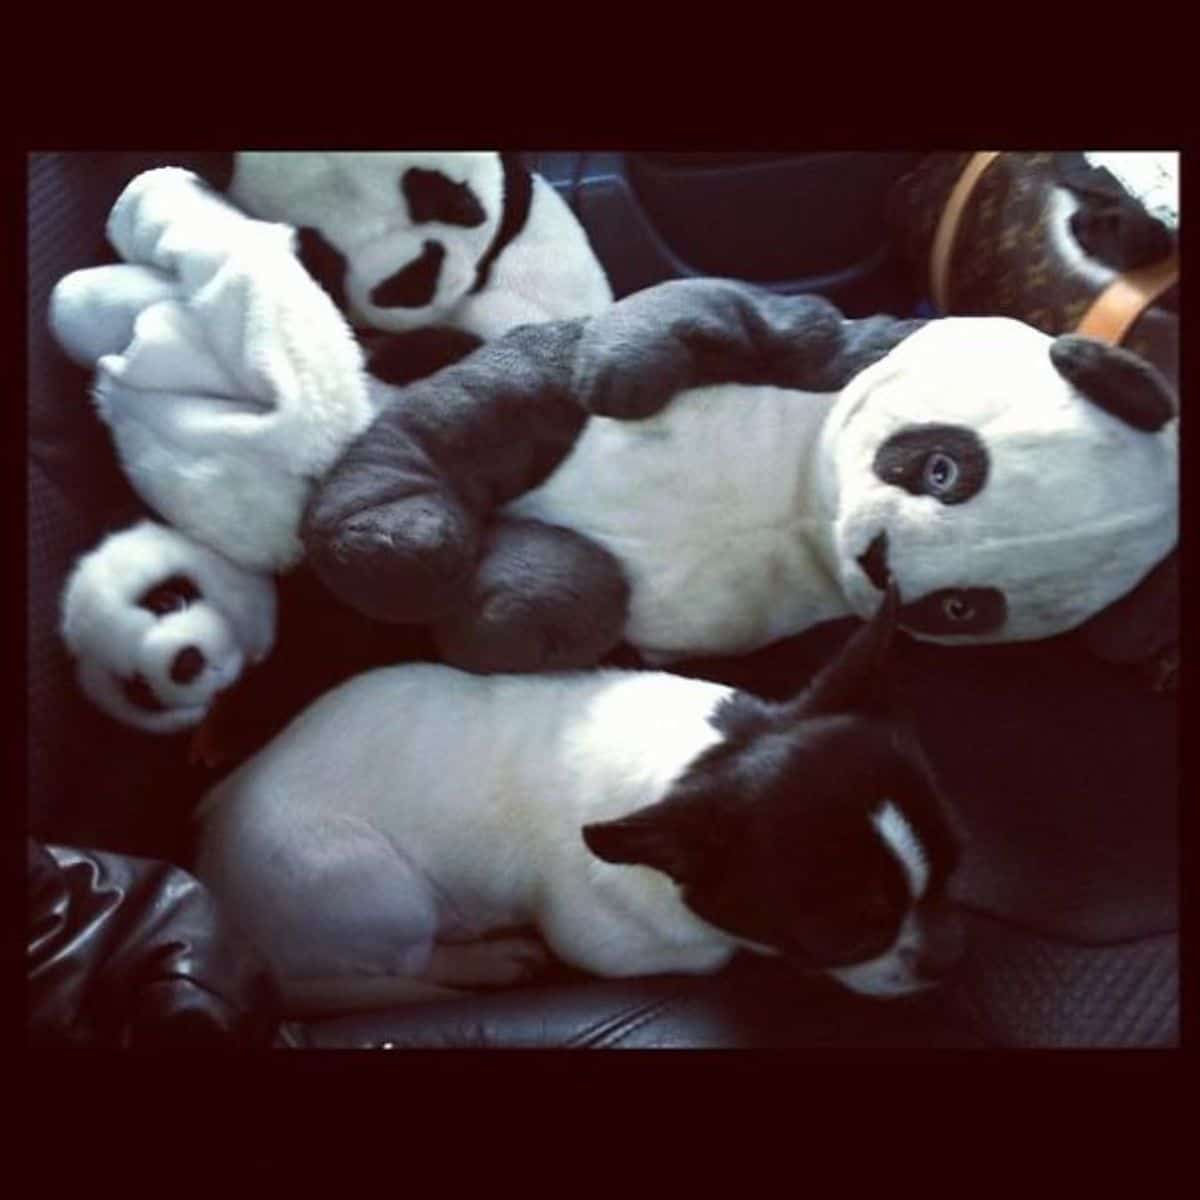 black and white puppy sleeping on a black sofa among a bunch of black and white panda stuffed toys